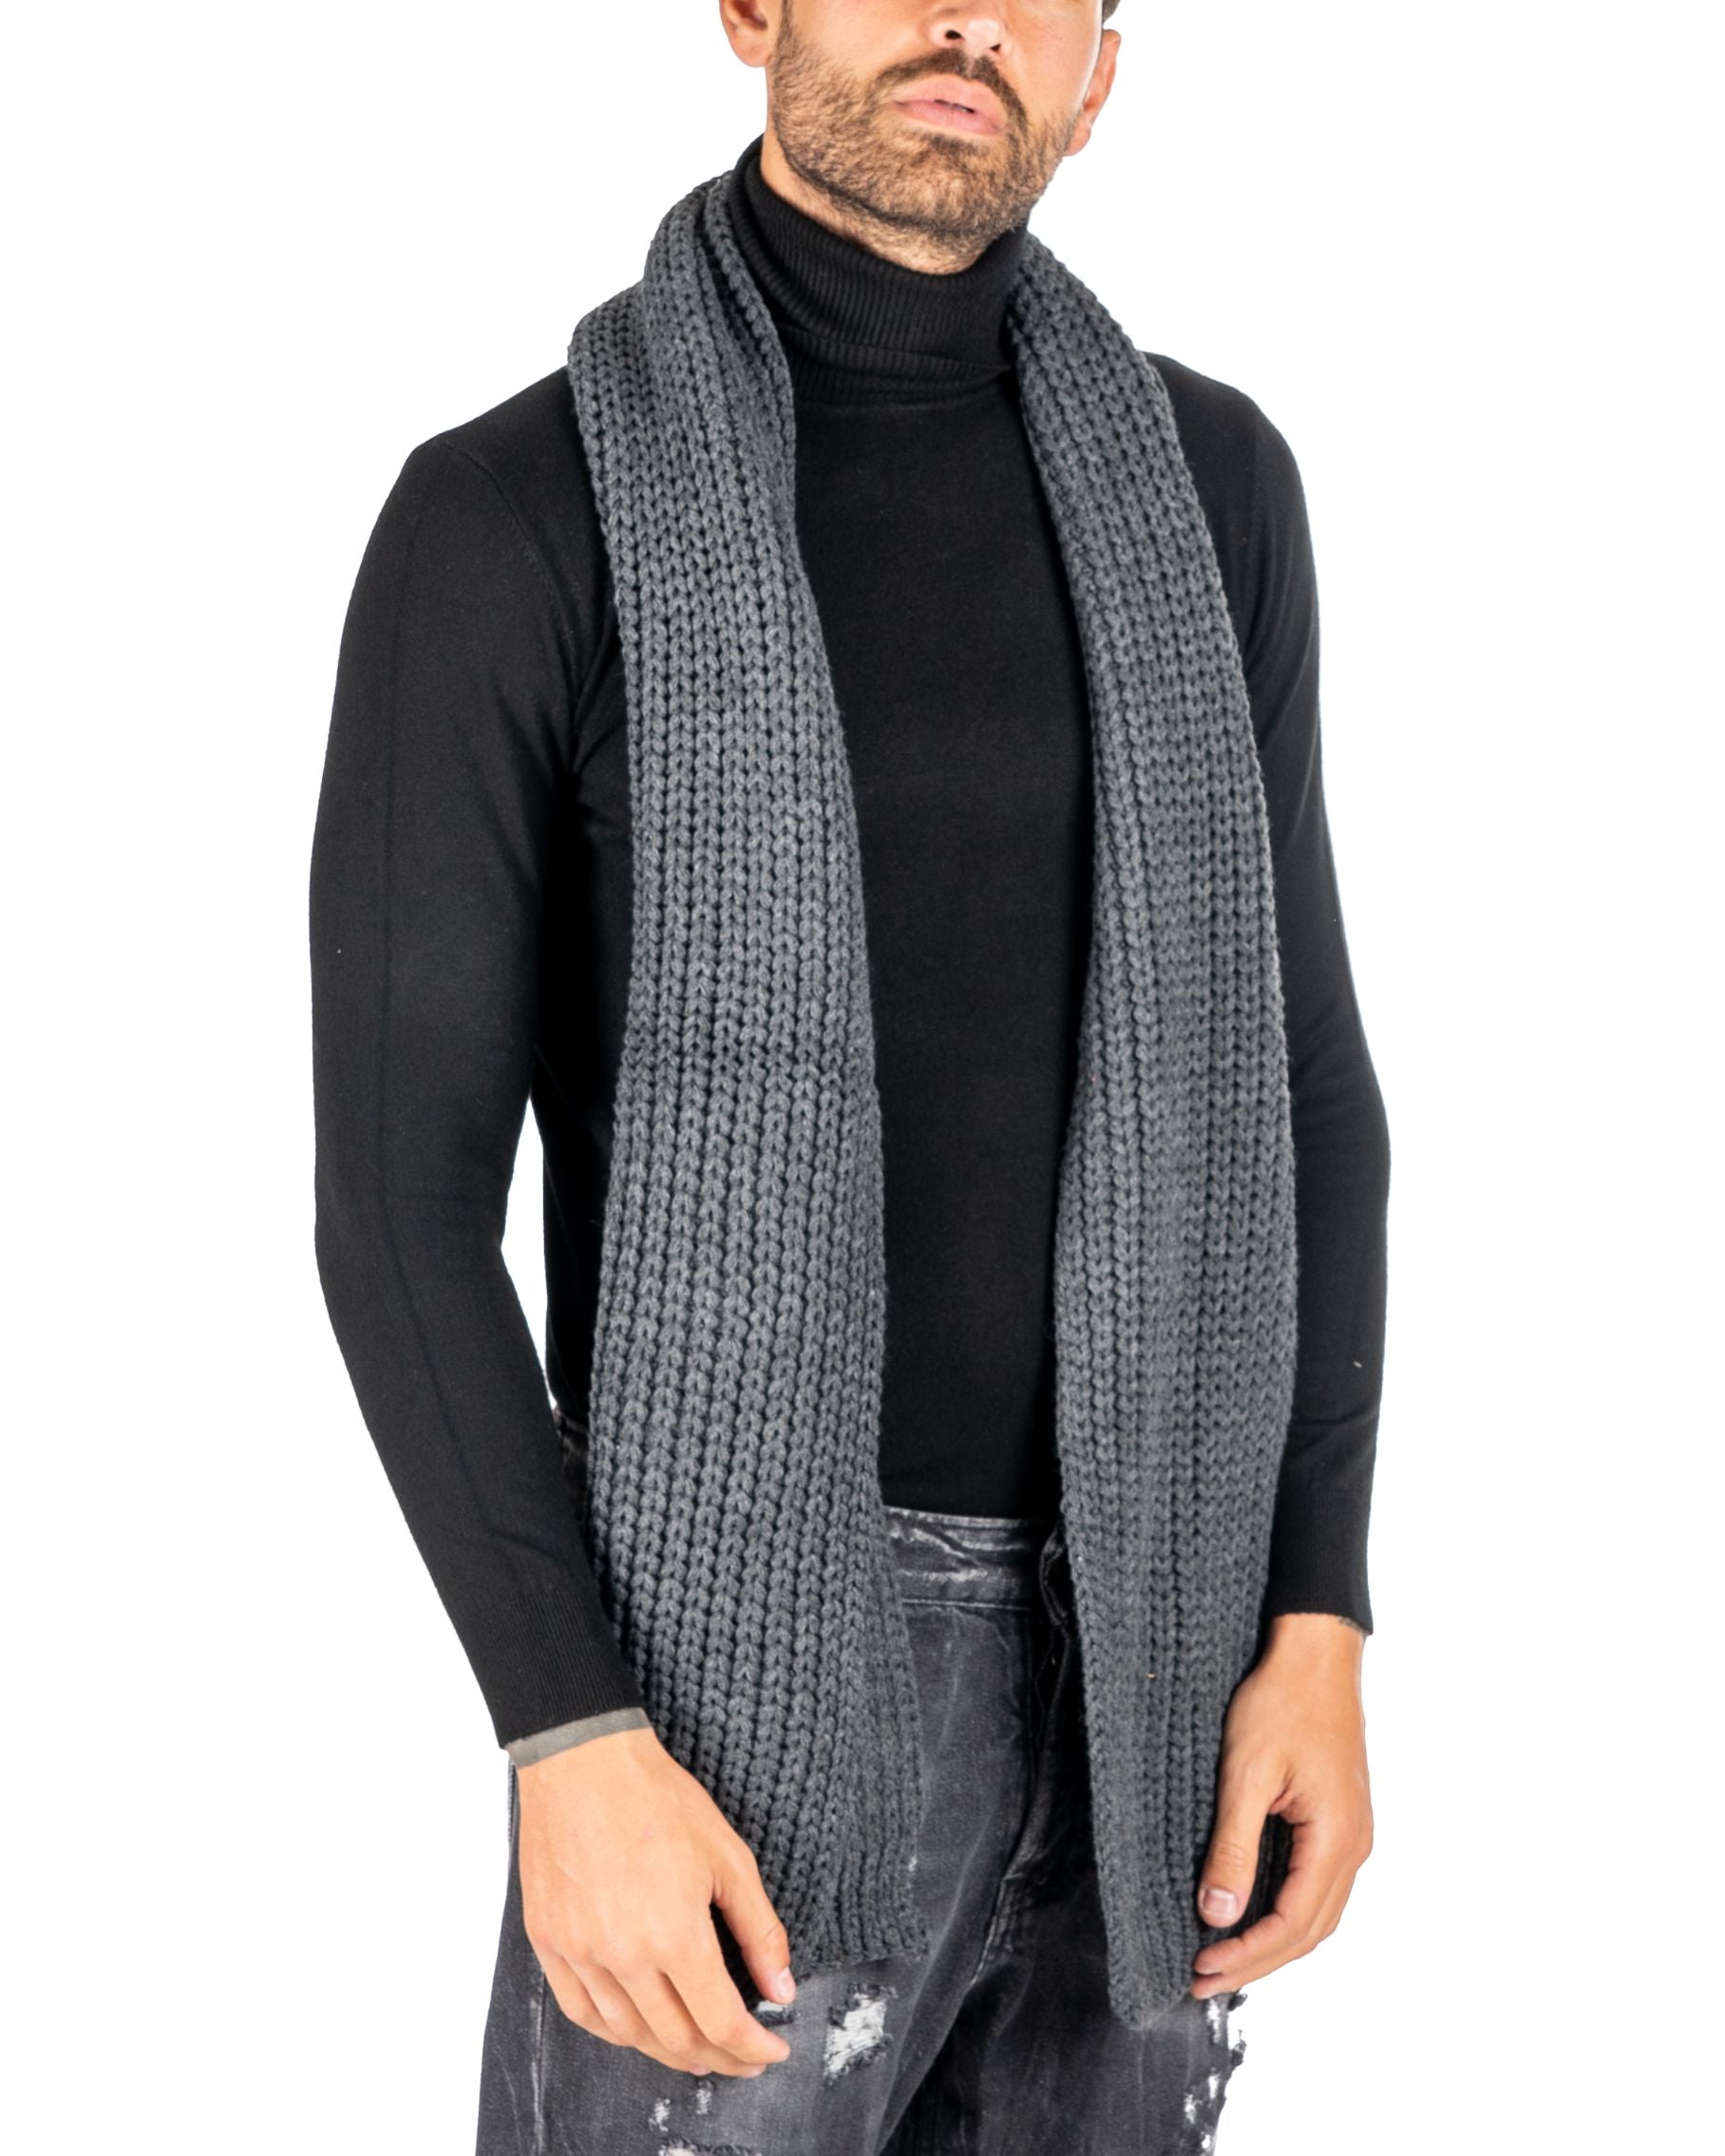 HEAVY GRAY SCARF WITH KNIT MOTIF